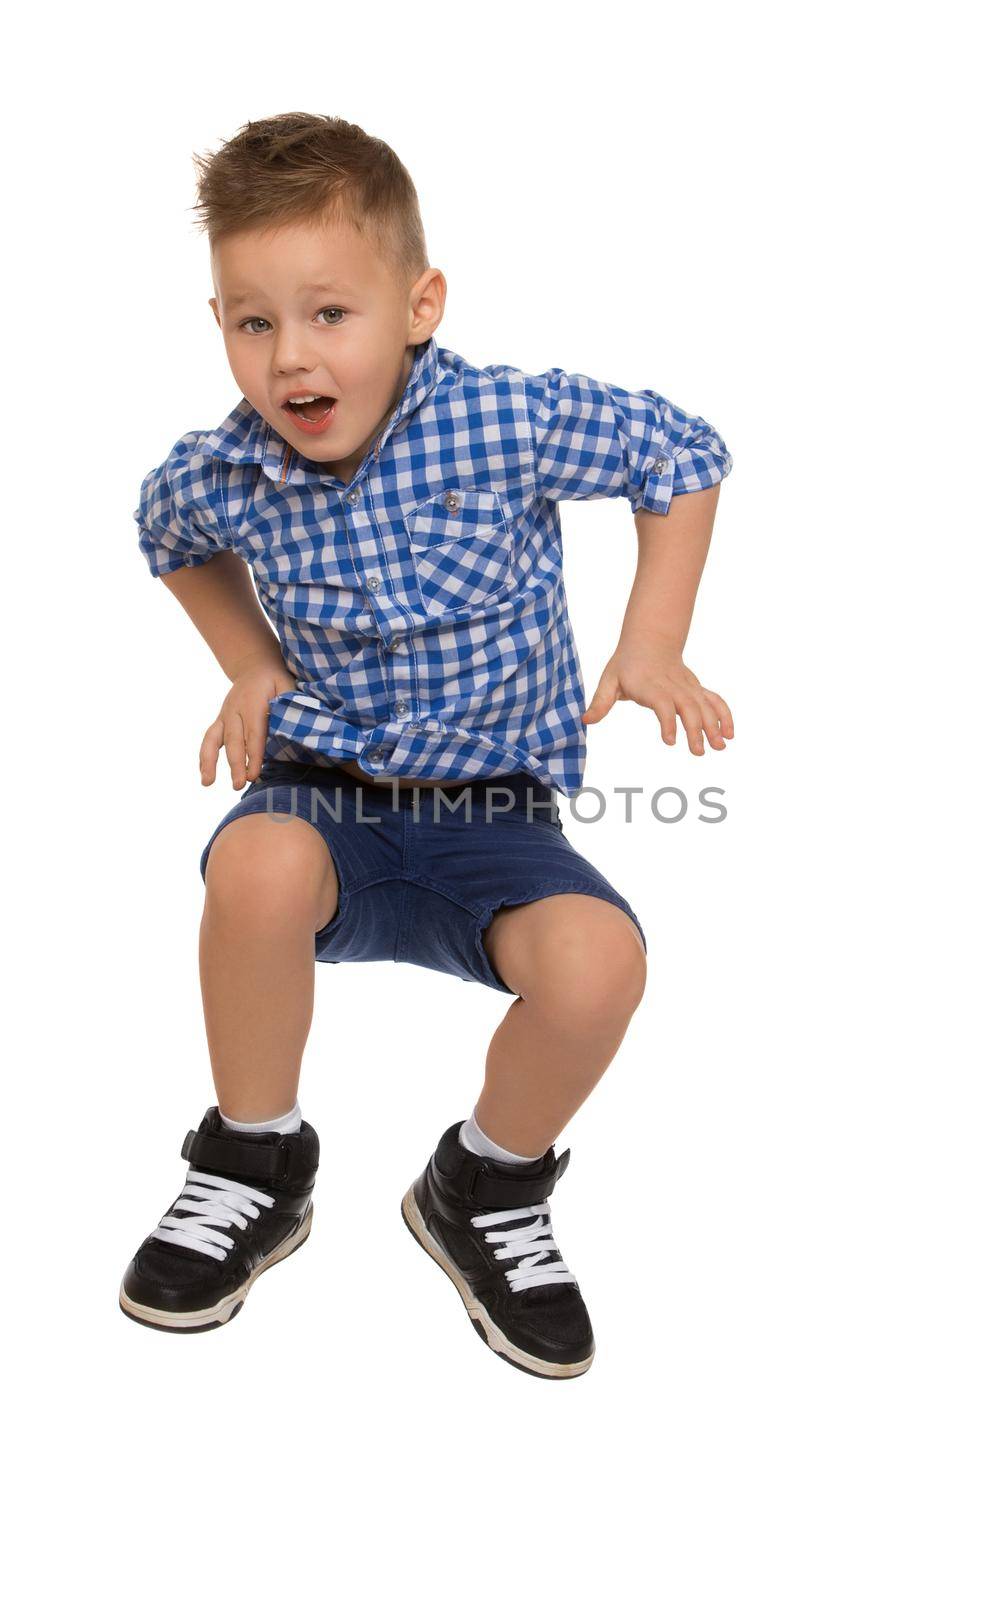 Cheerful little boy in a plaid shirt and blue shorts jumping - Isolated on white background